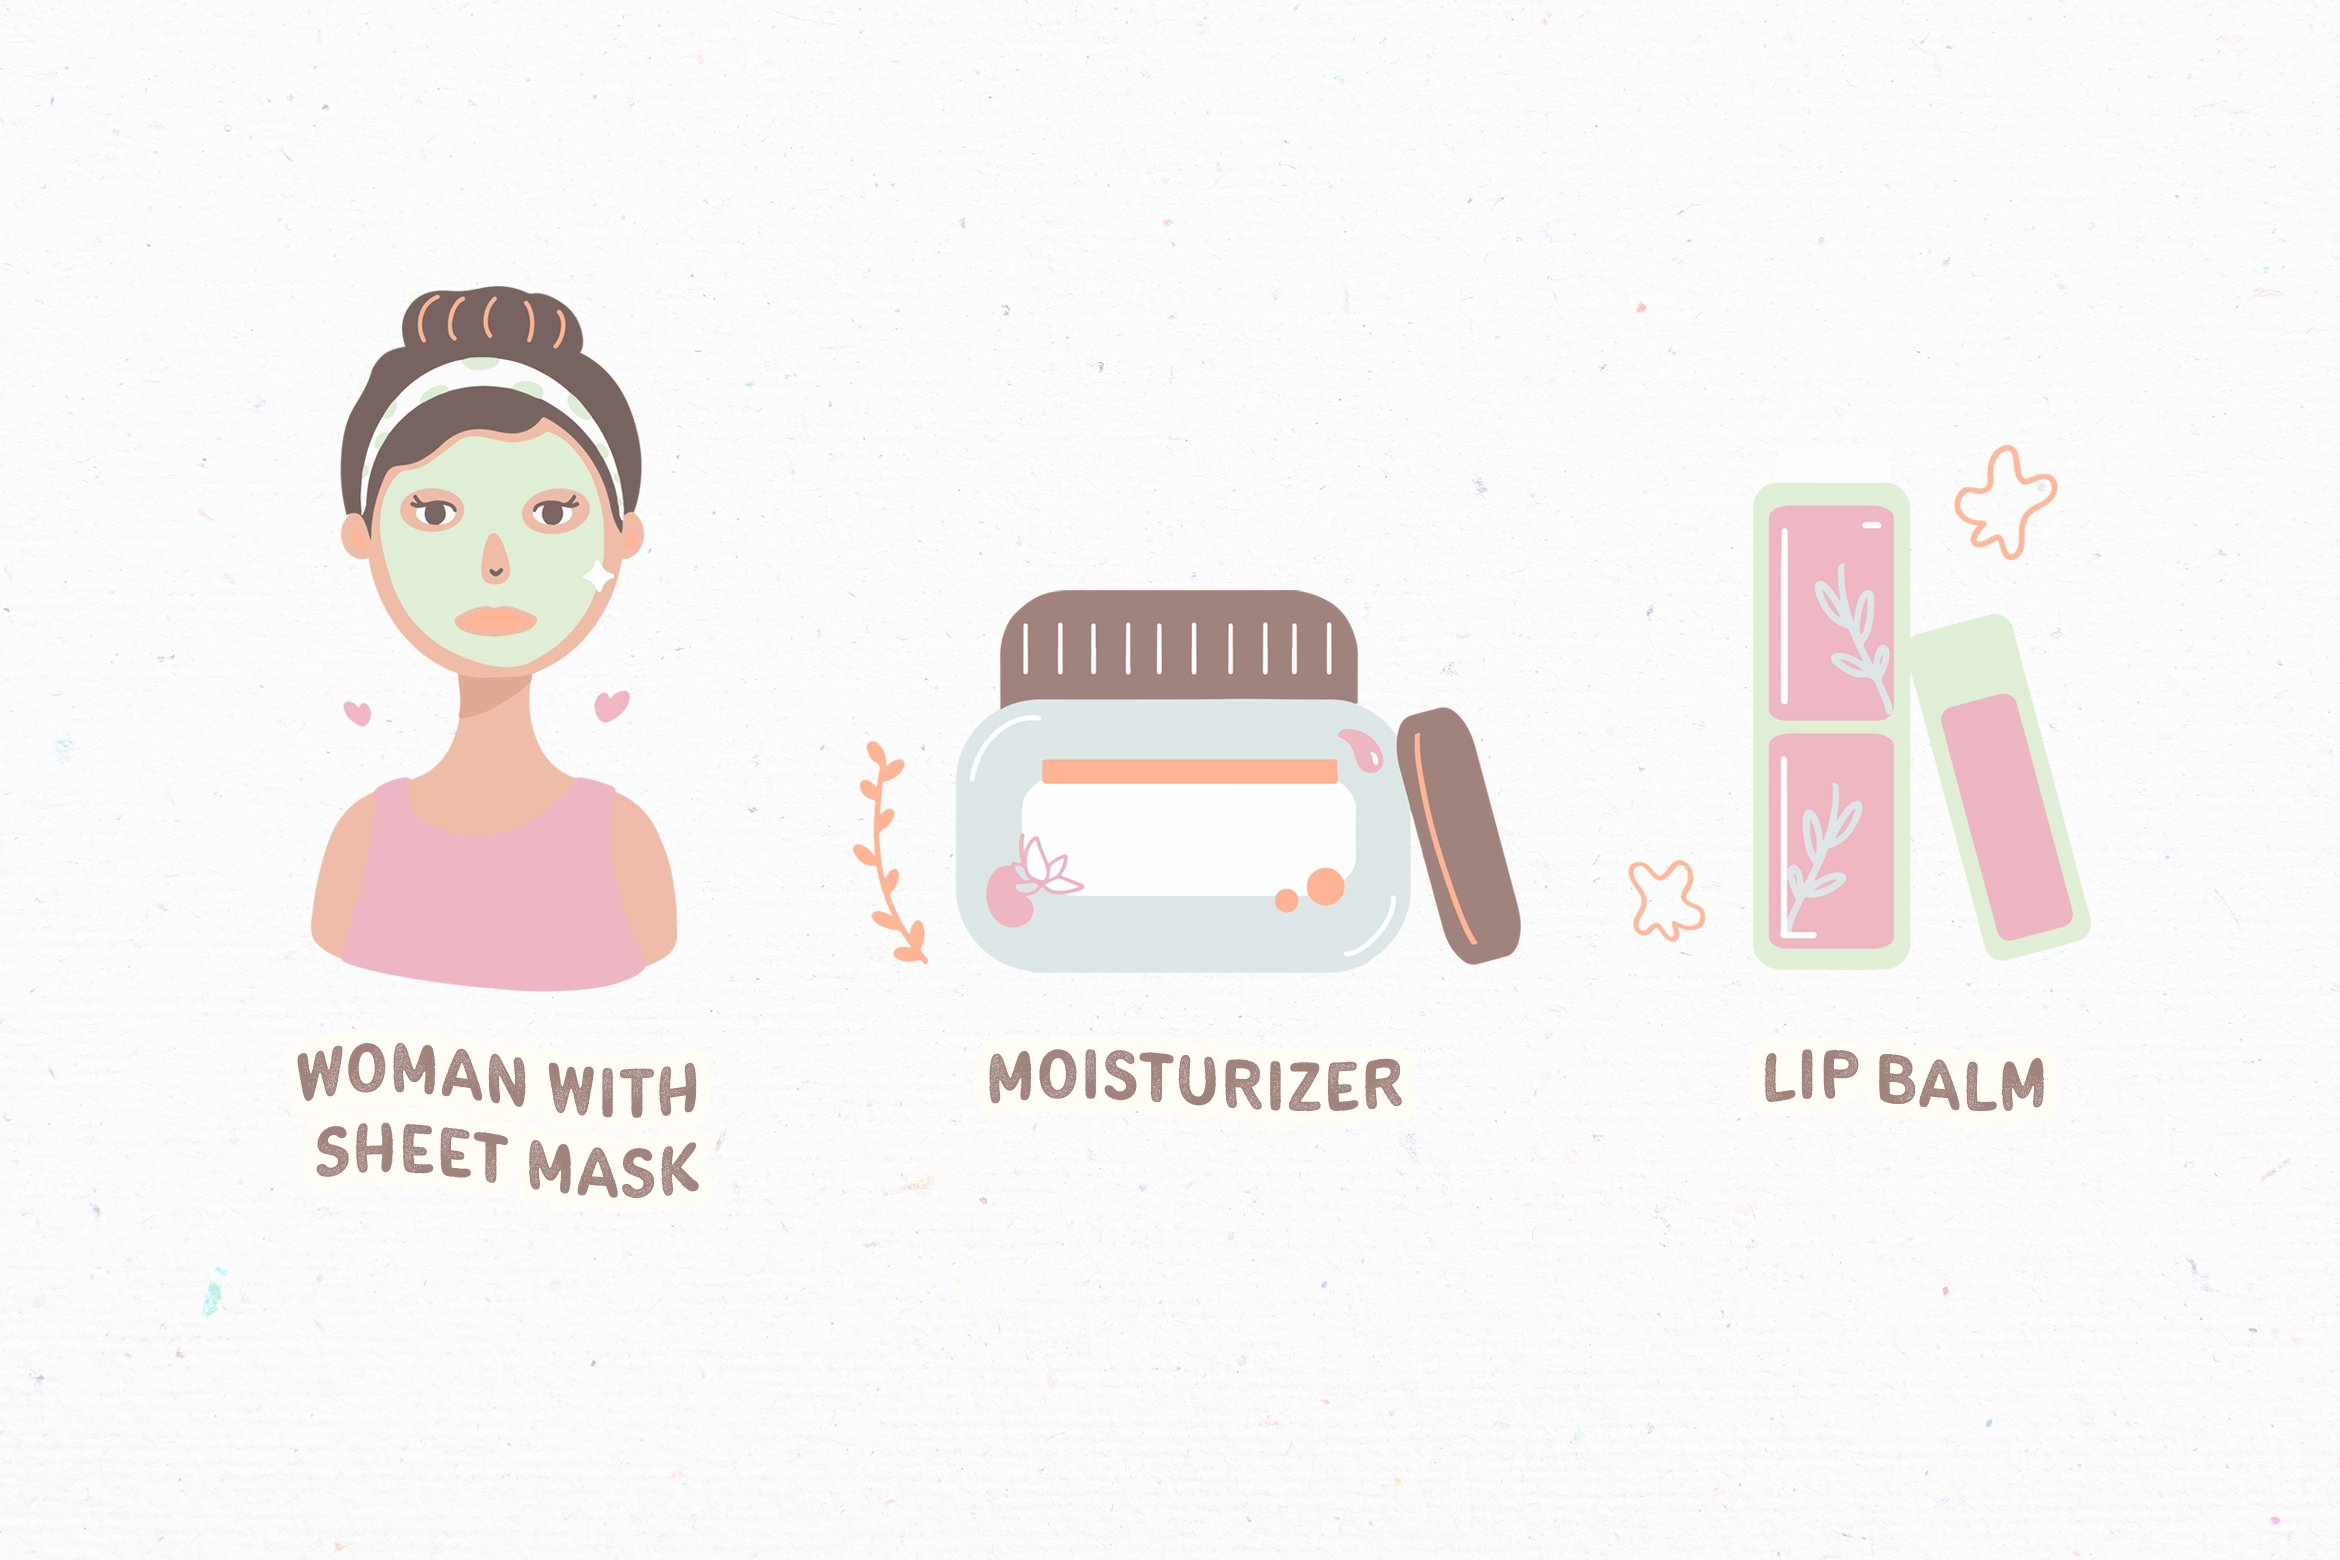 Cute three elements for the skin care illustrations.